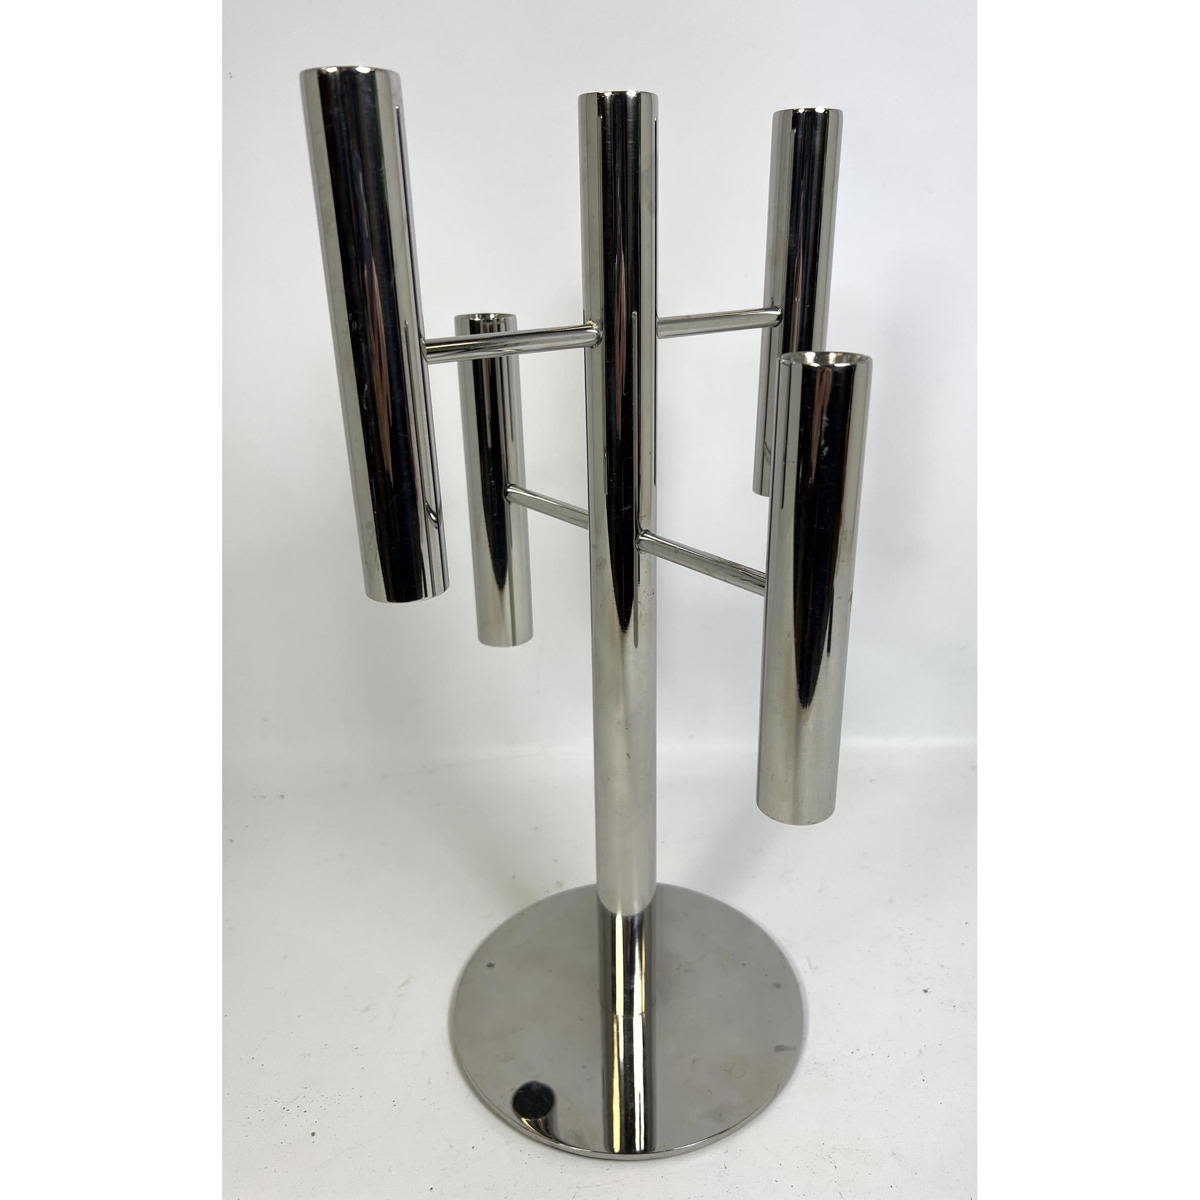 Modernist style Chrome Candle Stick 2b7eac